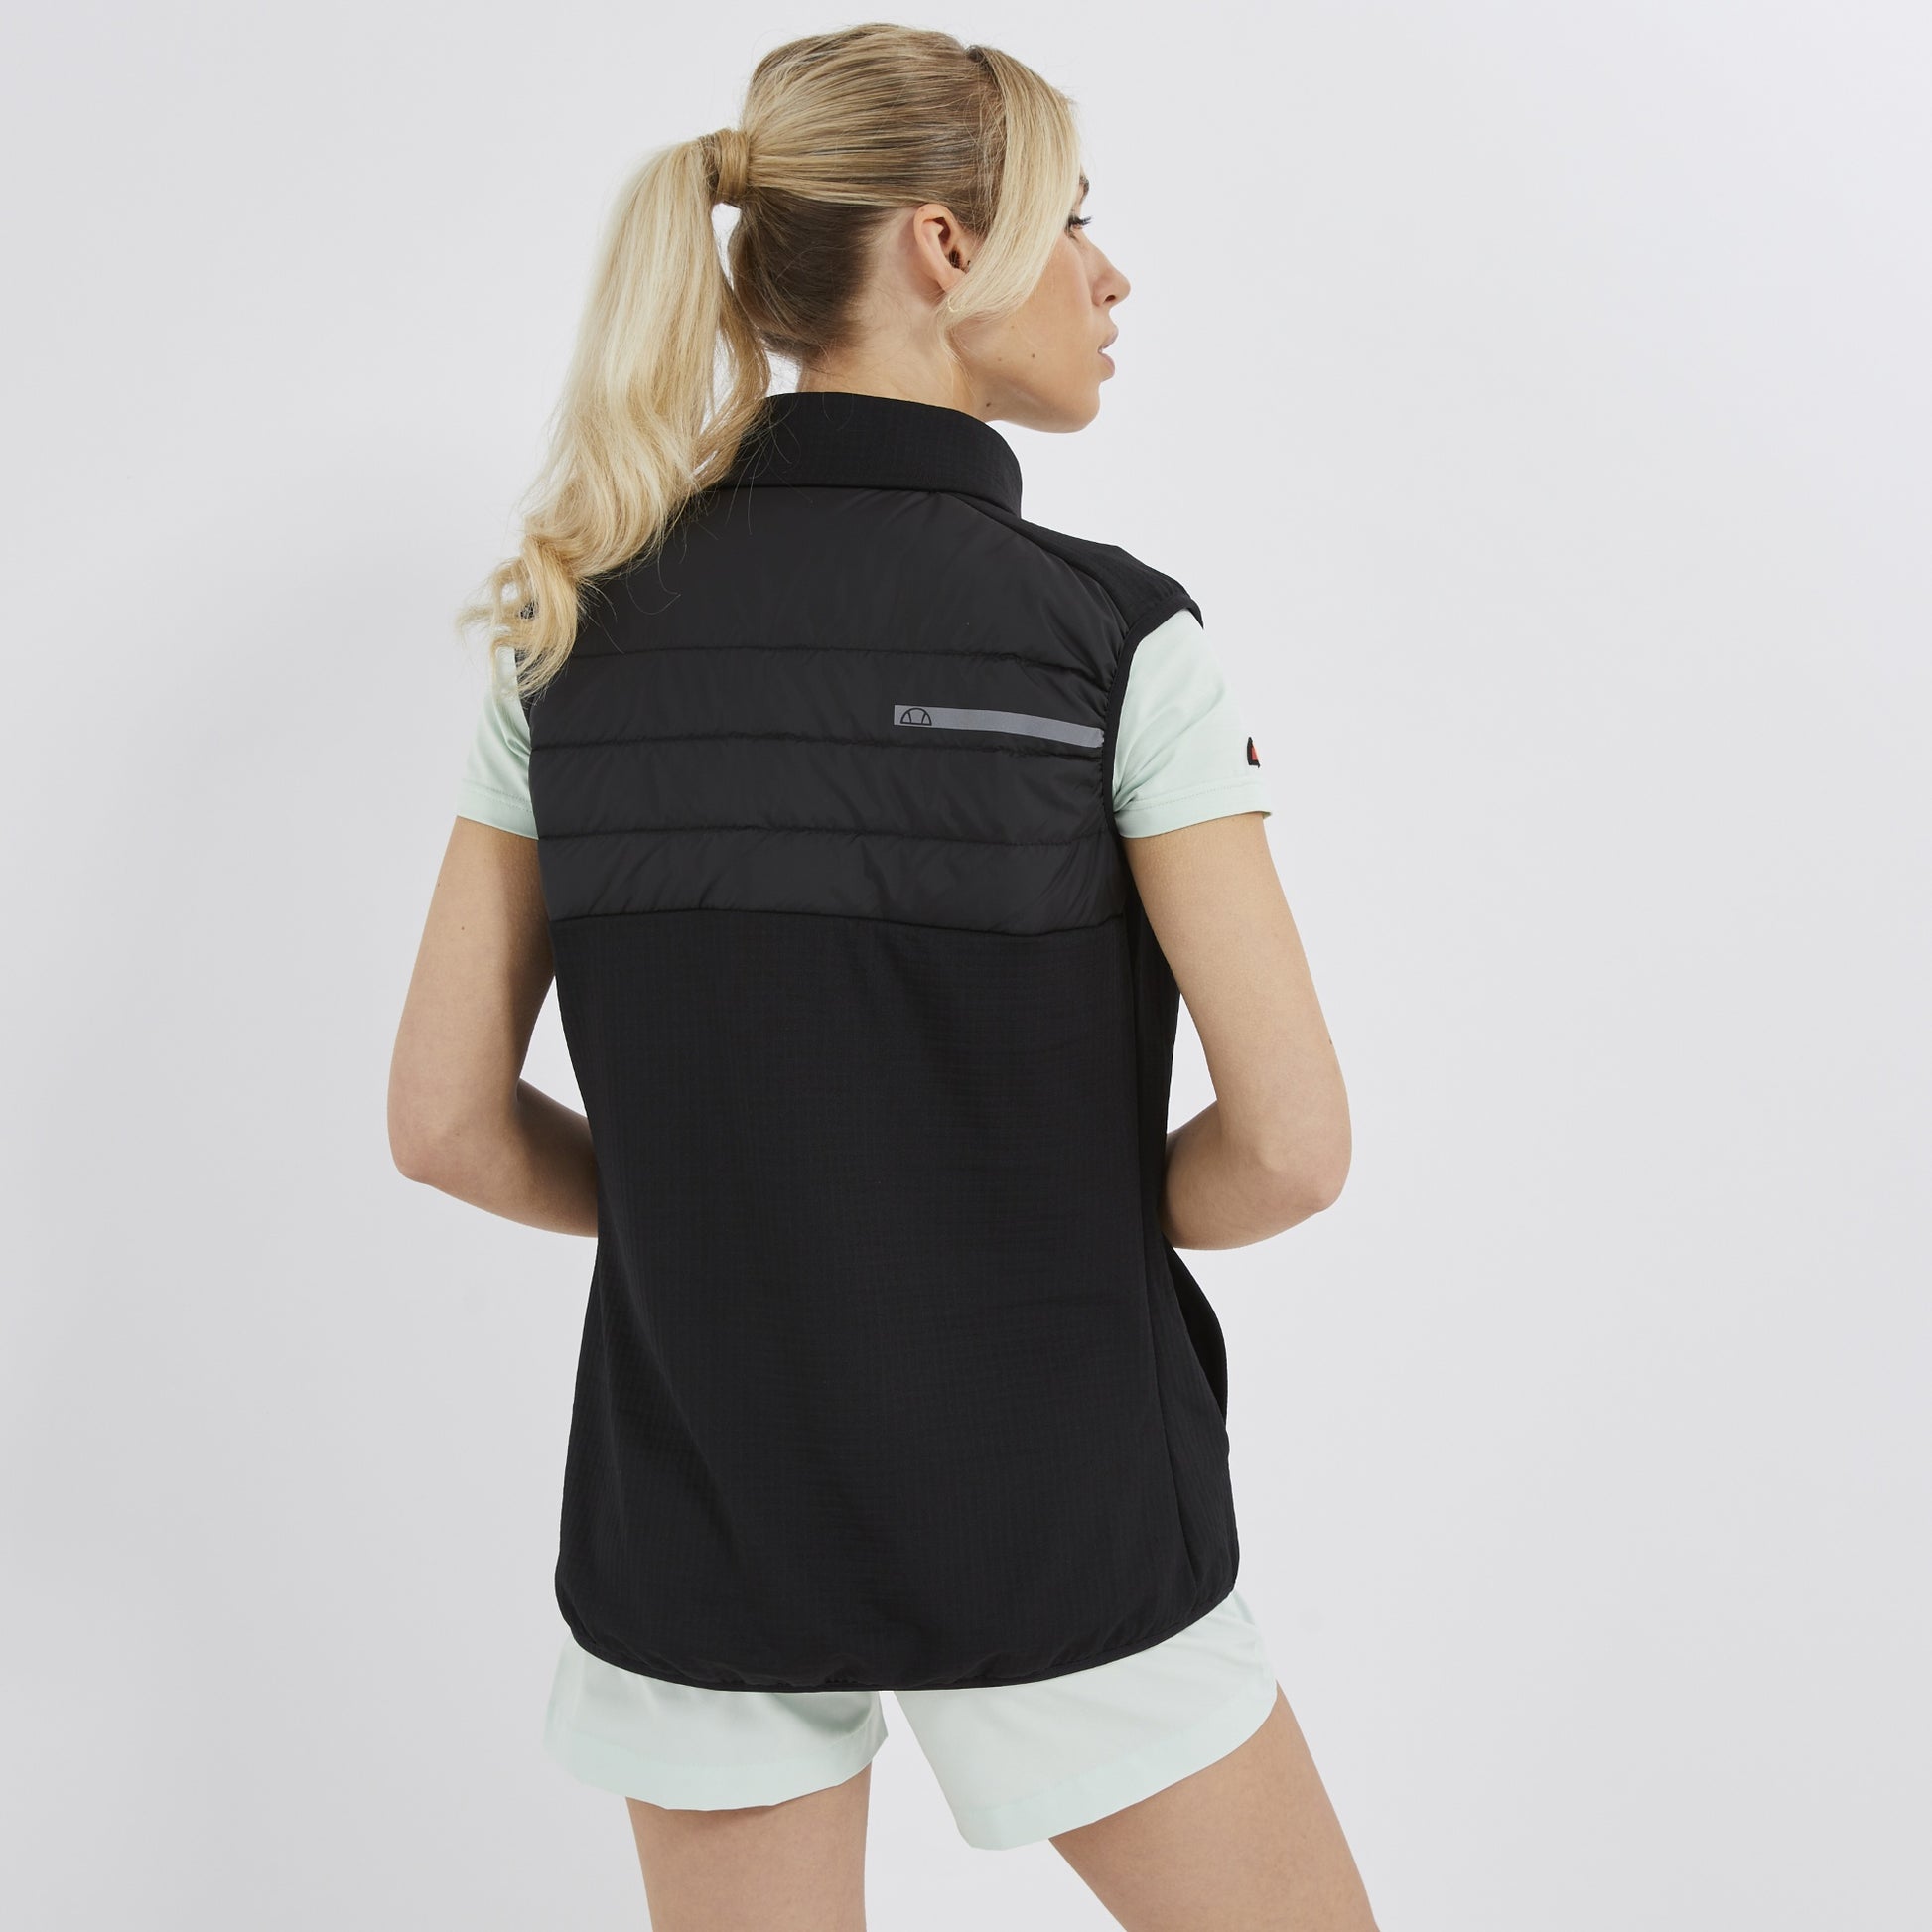 Ellesse Women's Soft-Stretch Gilet in Black with Quilted Panels